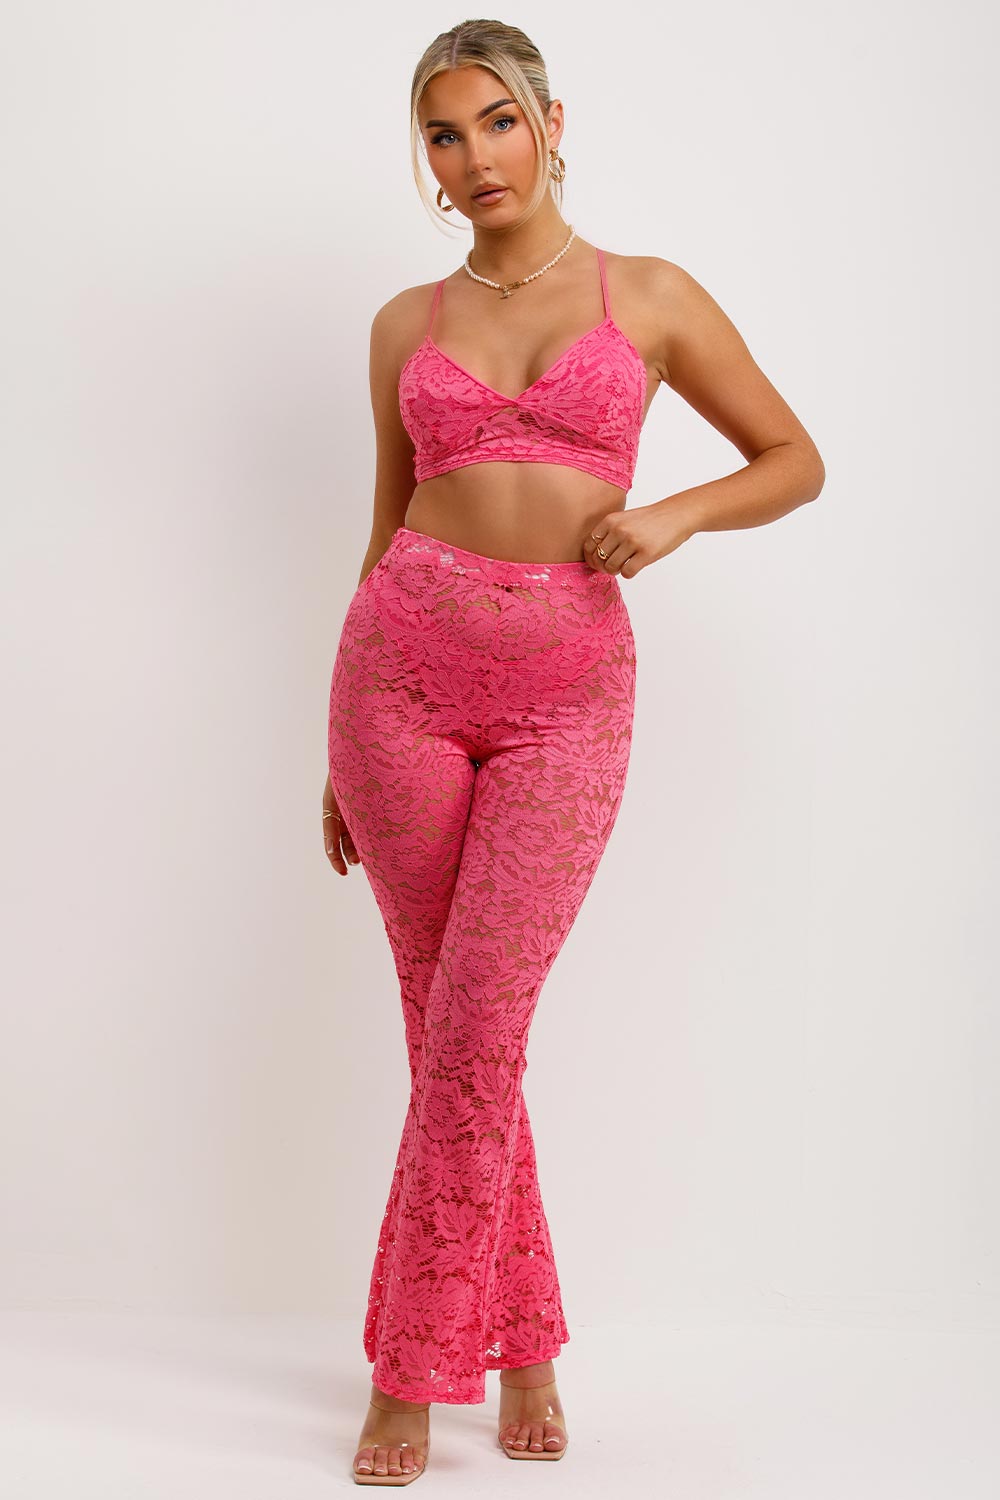 lace trousers and top two piece set festival rave party outfit